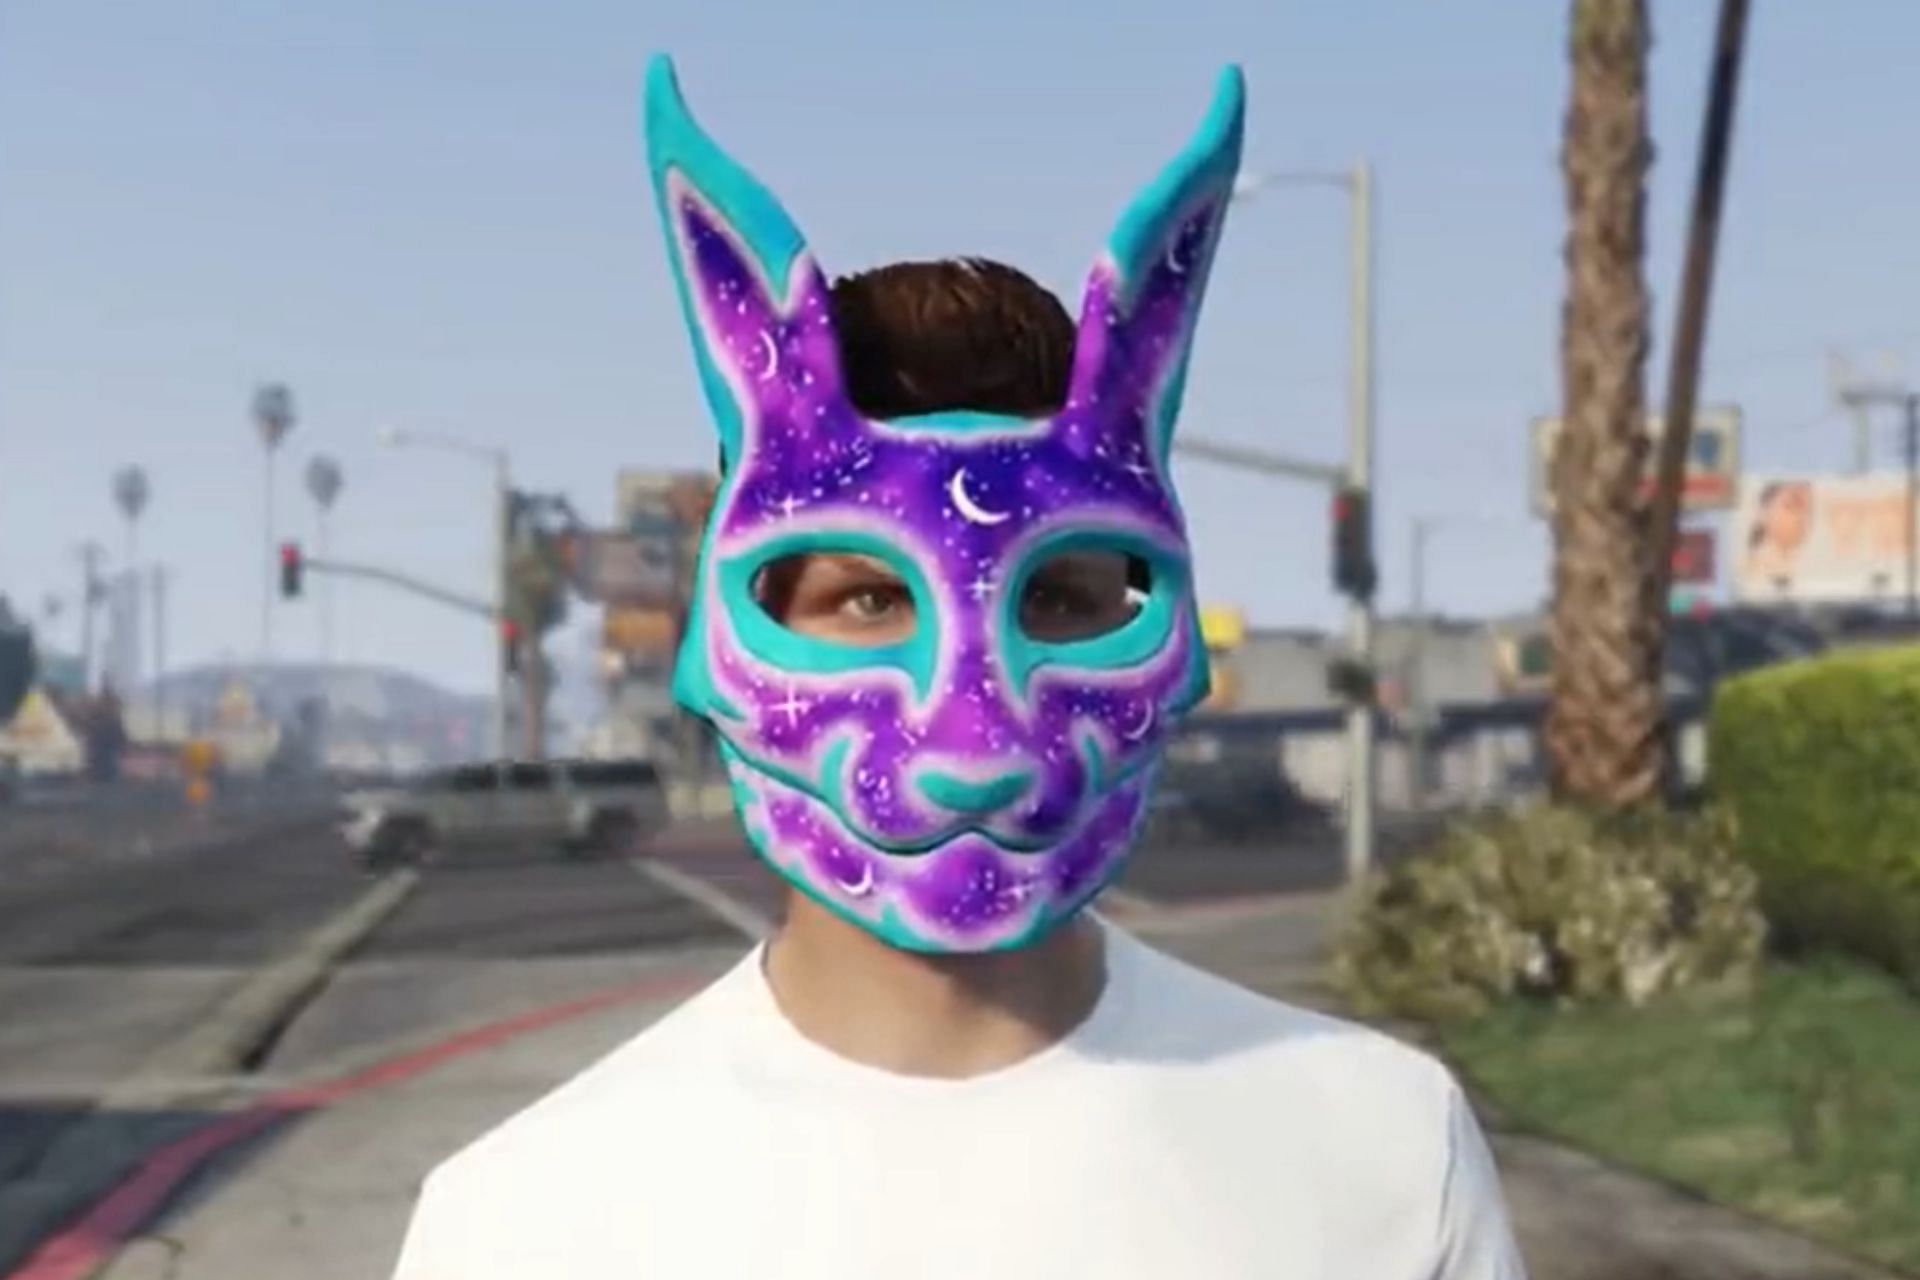 GTA Online gives players free and easy money in Lunar New Year event